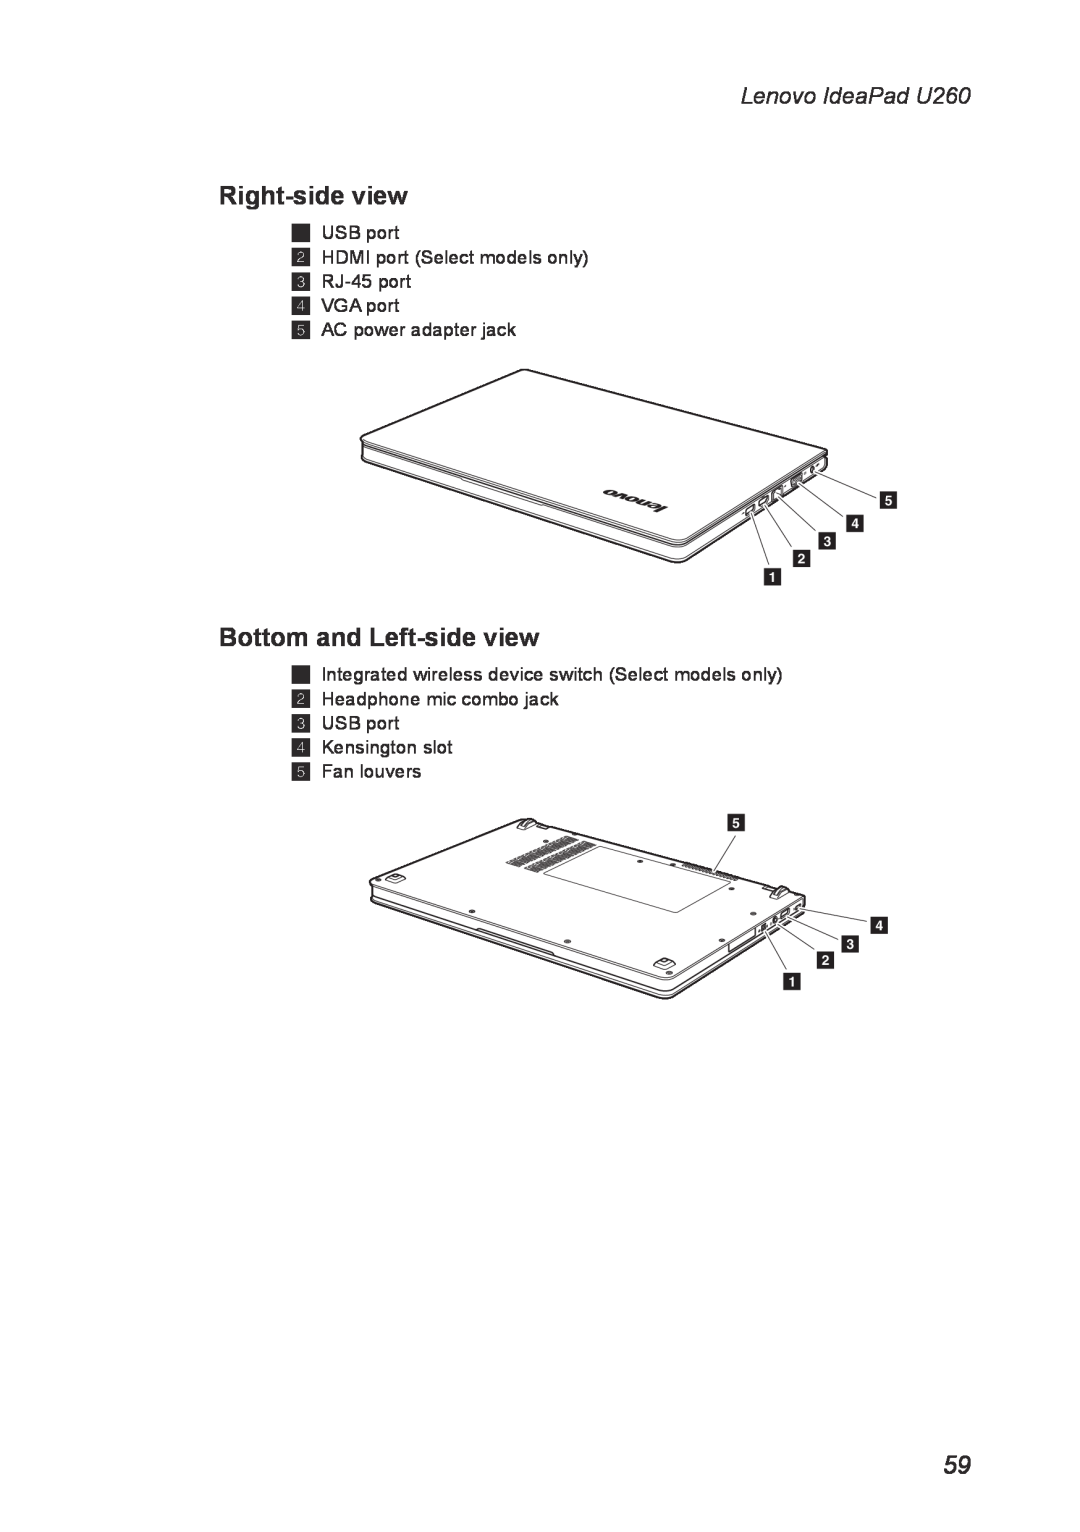 Lenovo manual Right-side view, Bottom and Left-side view, Lenovo IdeaPad U260, AC power adapter jack 